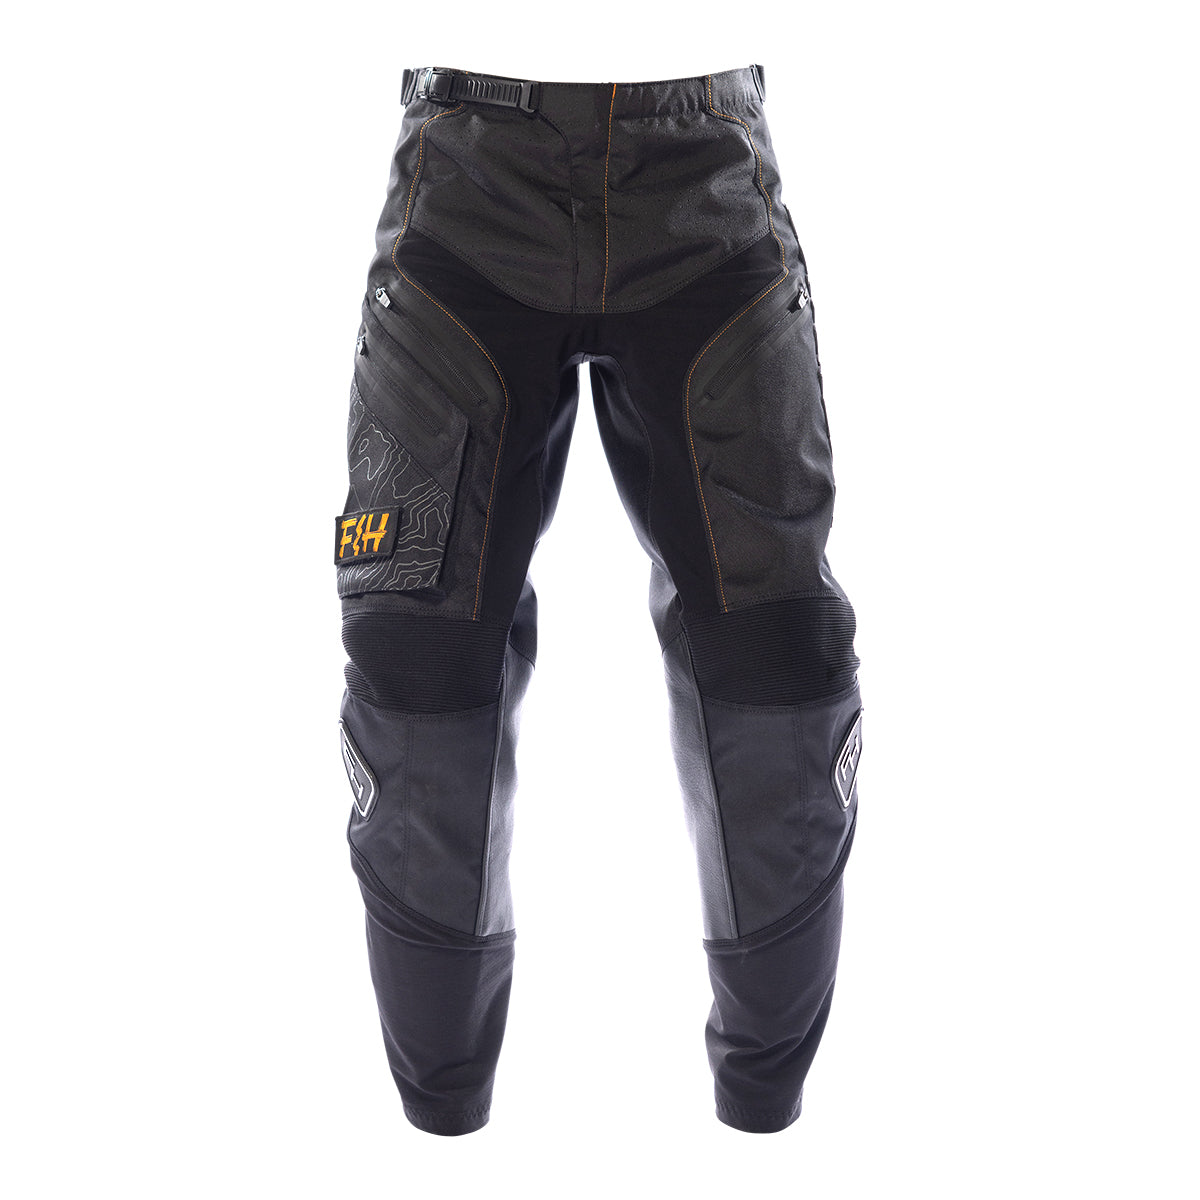 Fasthouse Off-Road Pant - Black/Amber – City Limit Moto